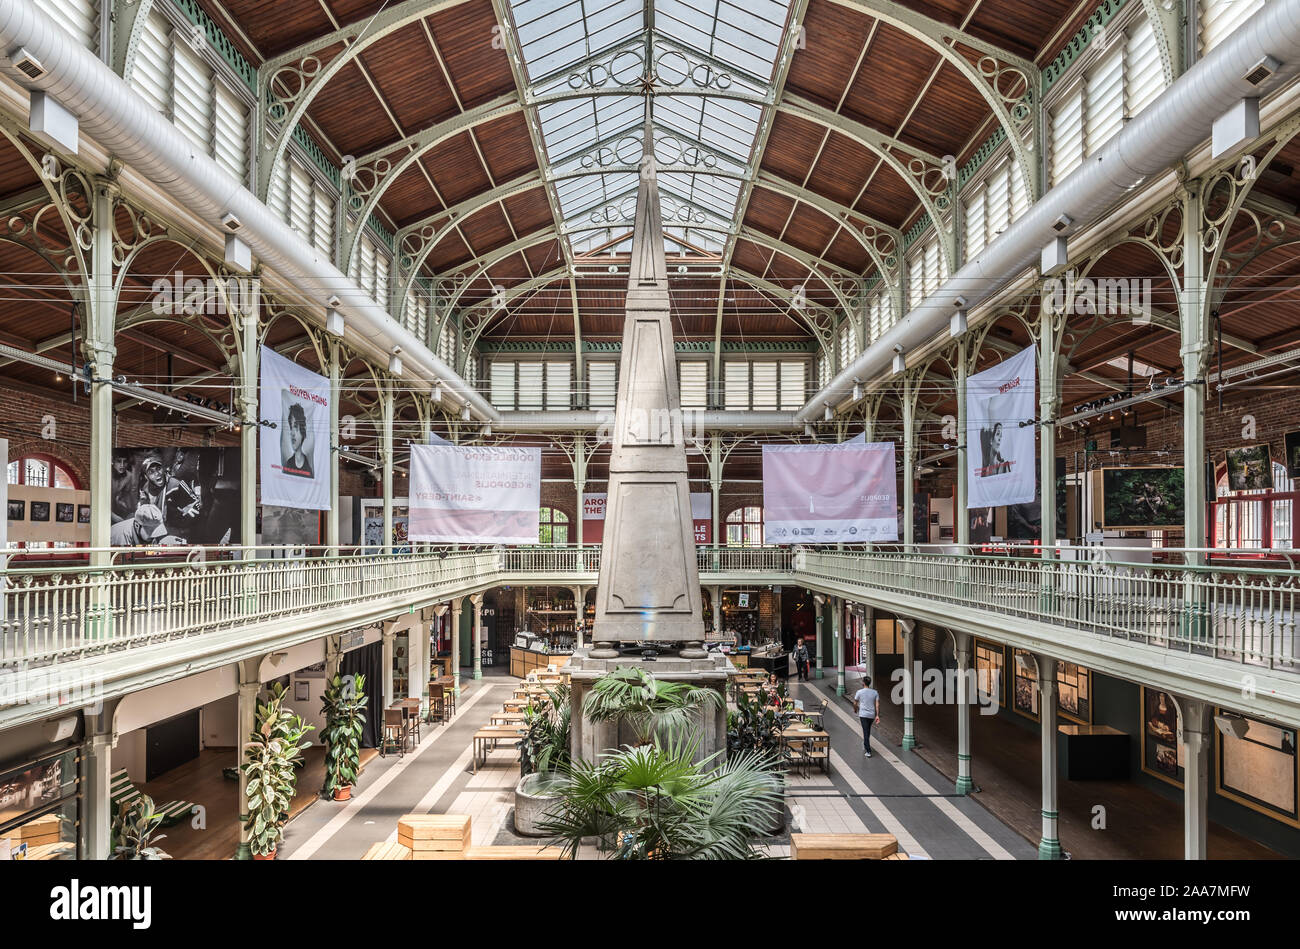 Brussels Old Town / Belgium - 06 25 2019: Interior design of the Halles Saint-Géry -  Sint Goriks Hallen  a commercial mall with restaurants, expositi Stock Photo